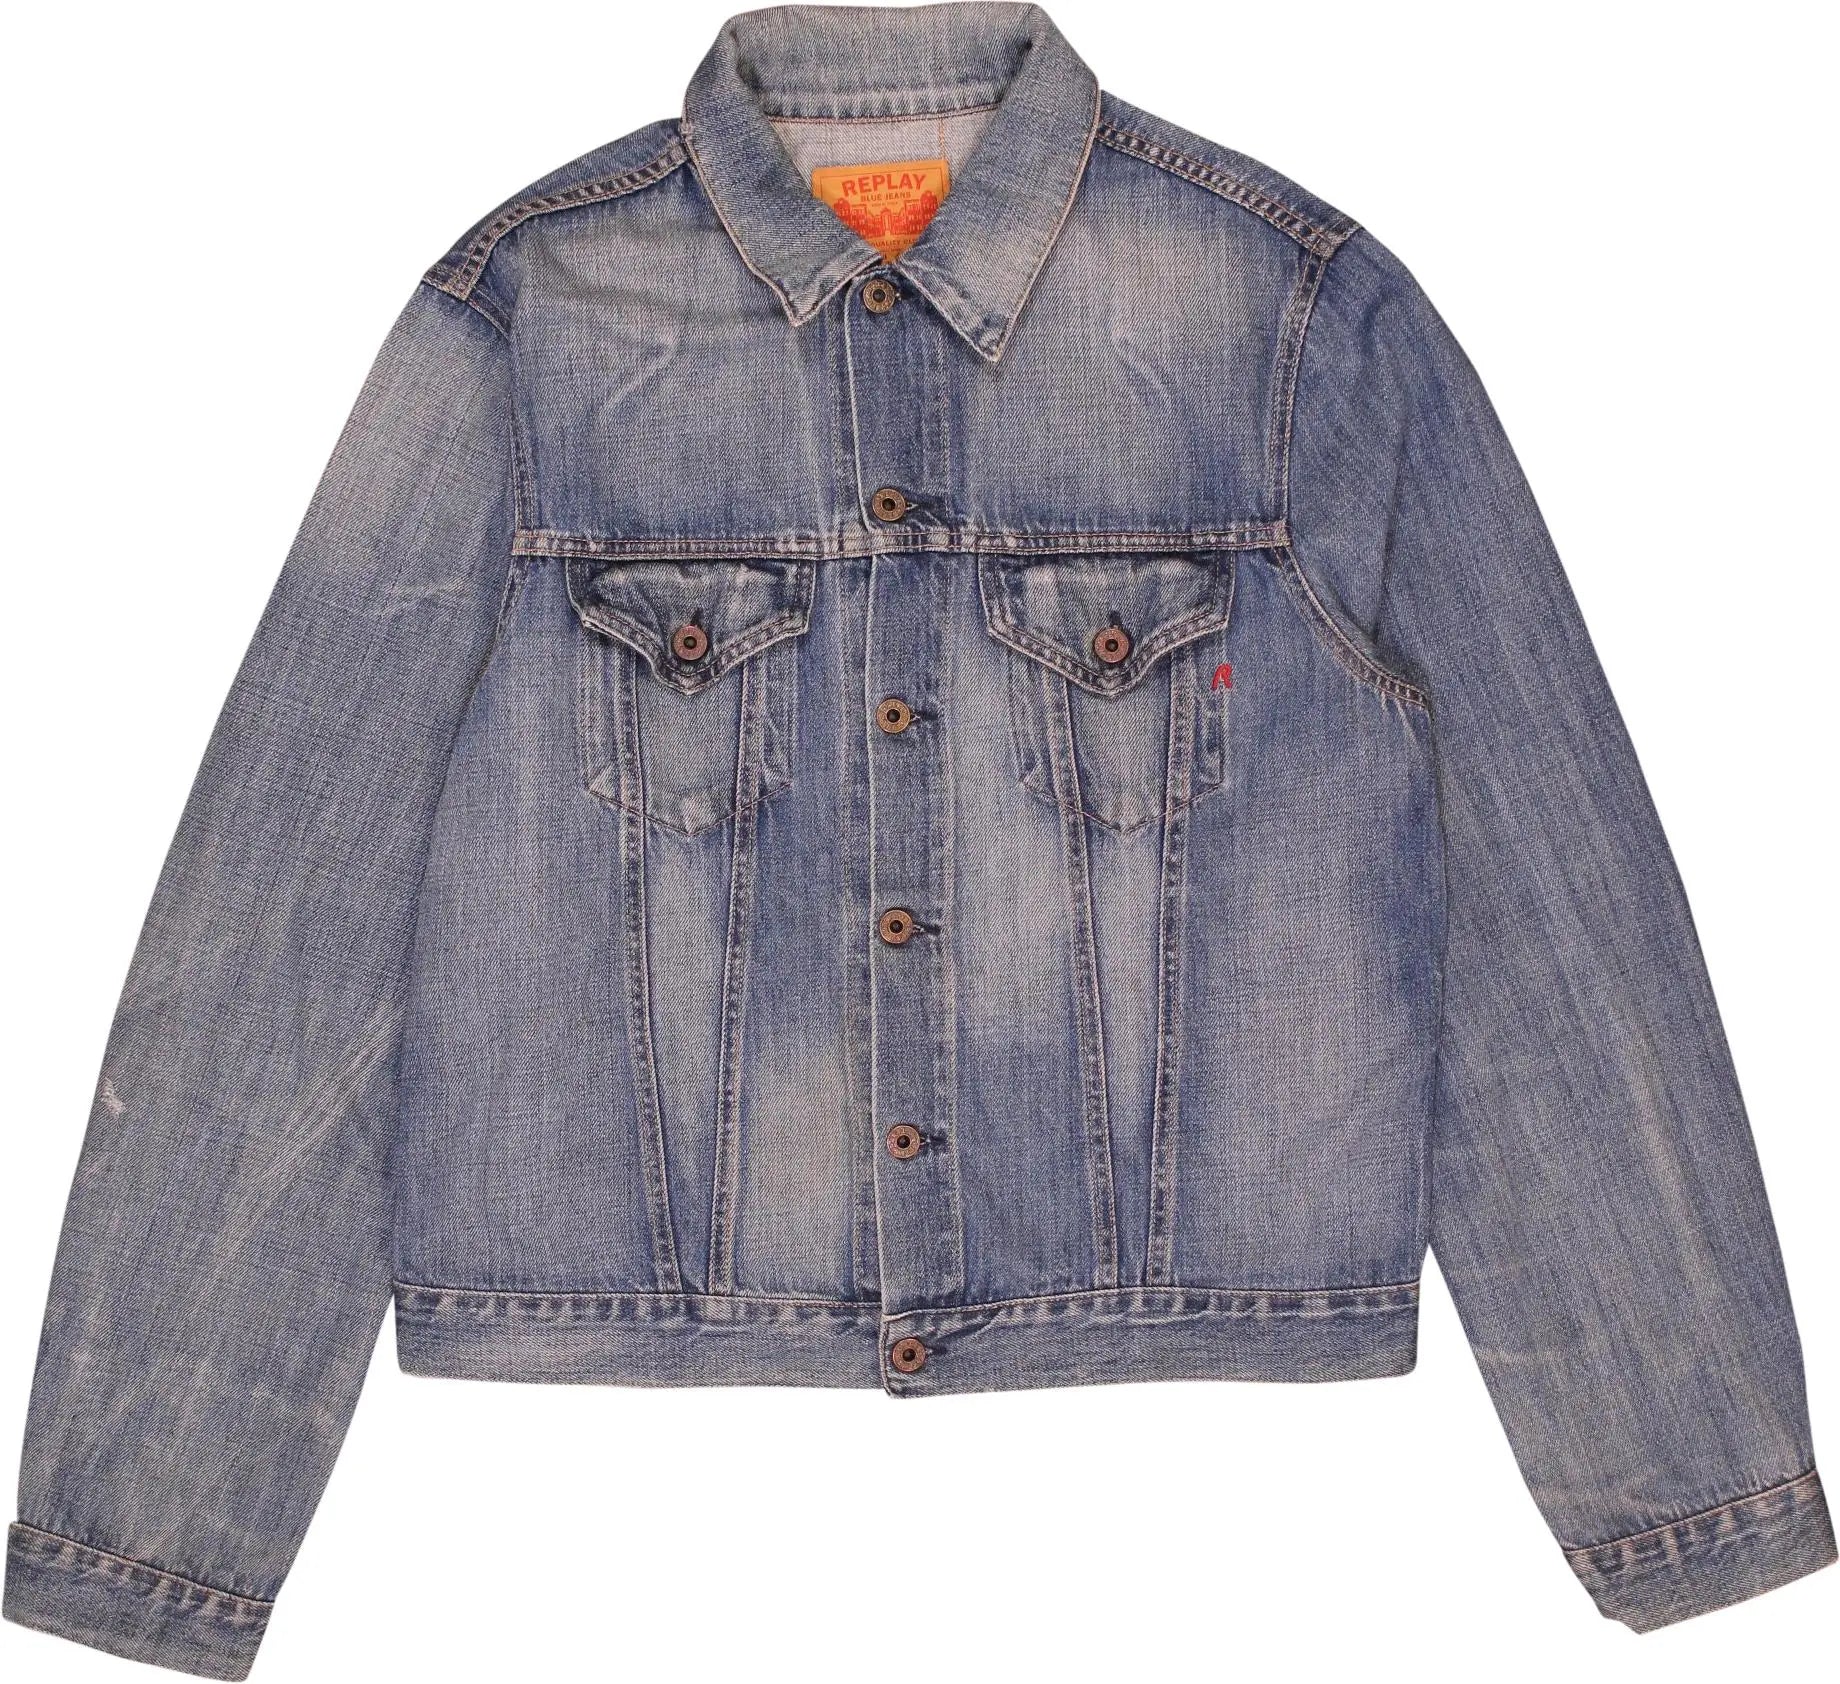 Replay - Denim Jacket by Replay- ThriftTale.com - Vintage and second handclothing